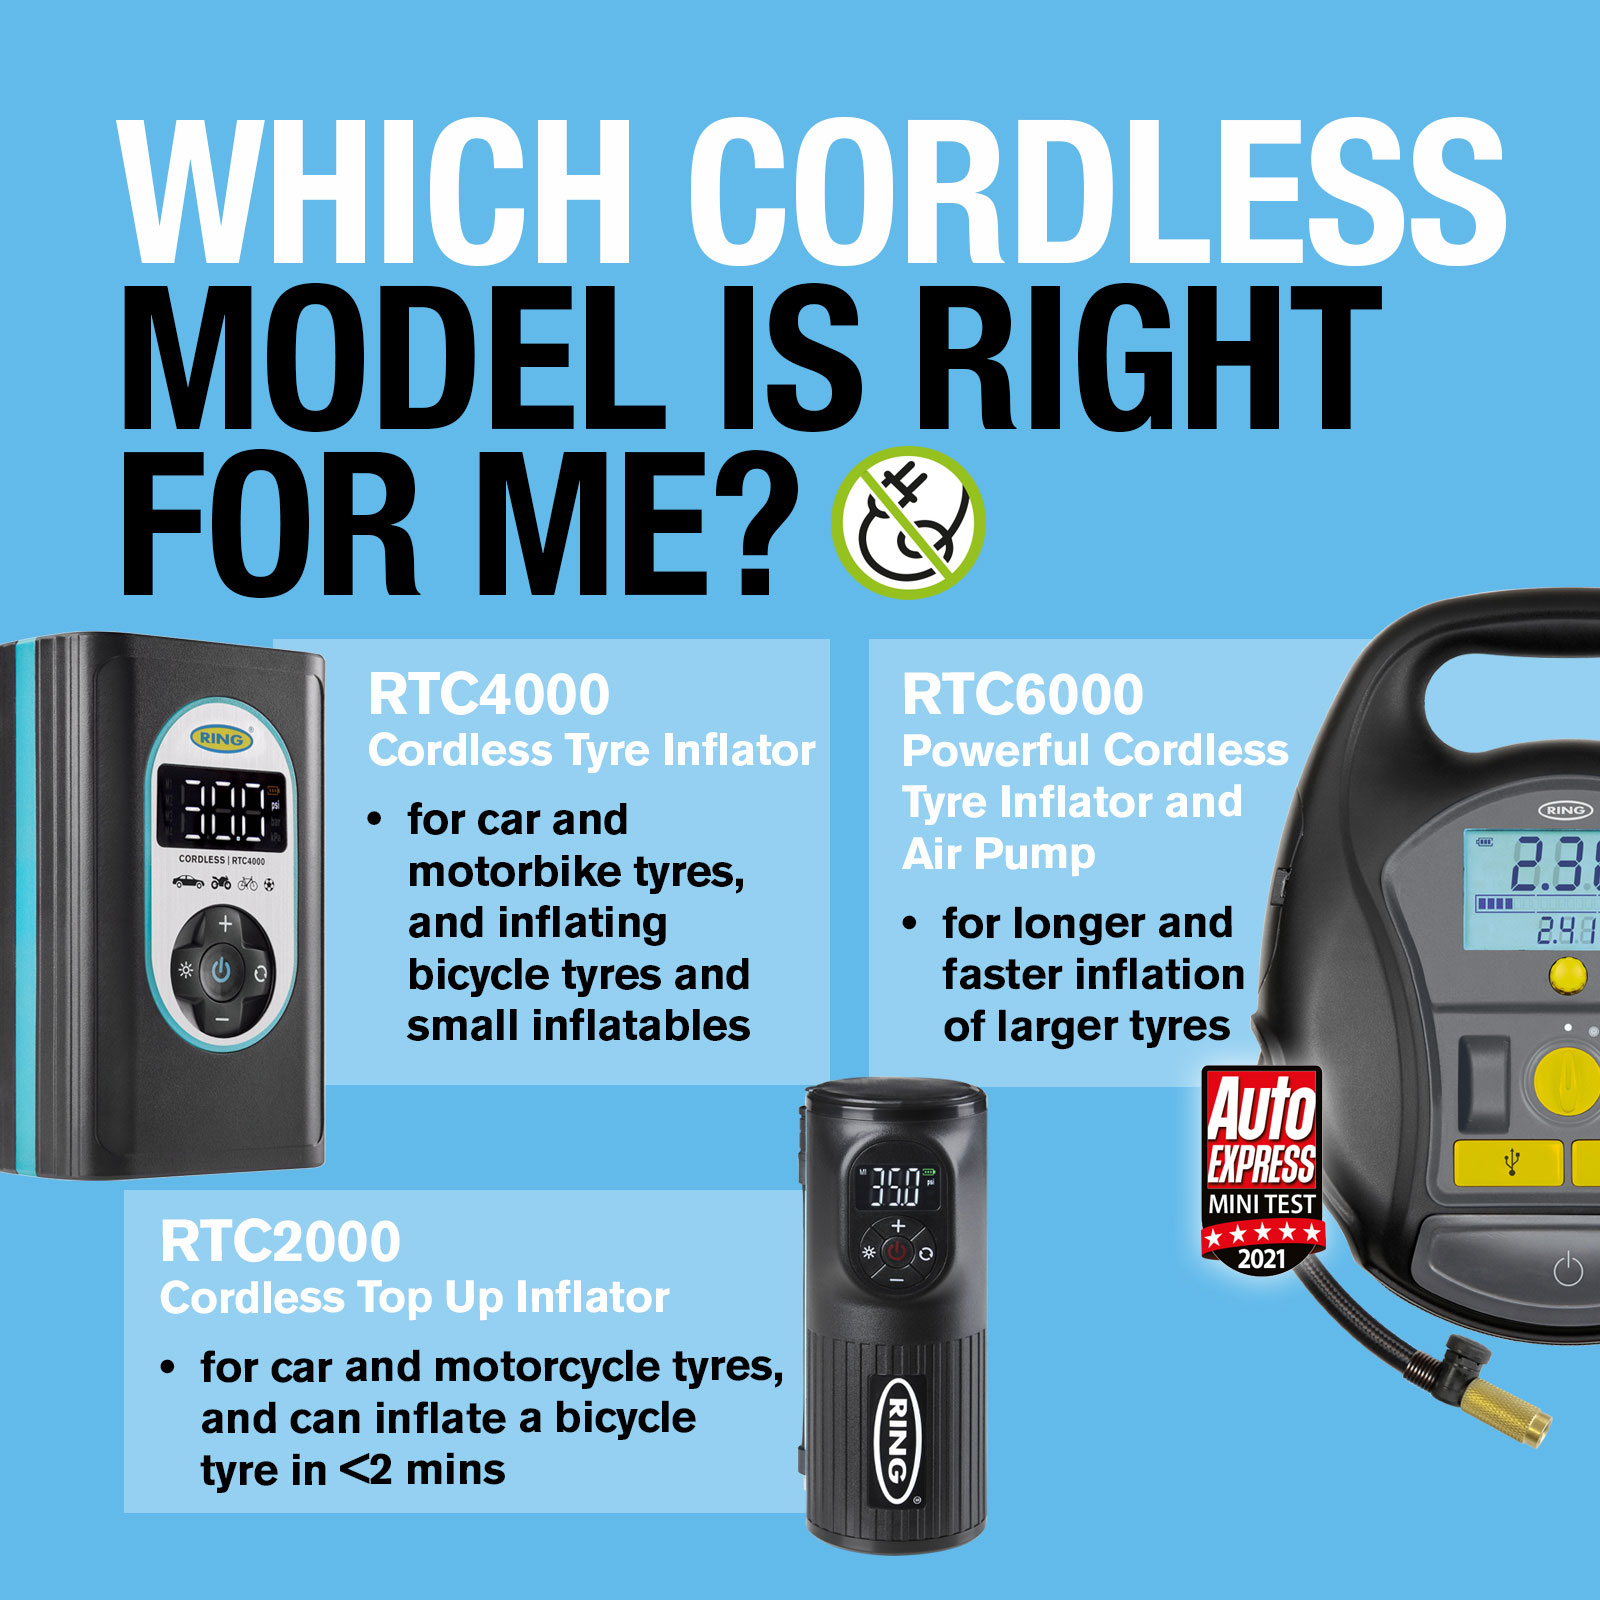 Ring RTC4000 Cordless Rechargeable Tyre inflator tested! 